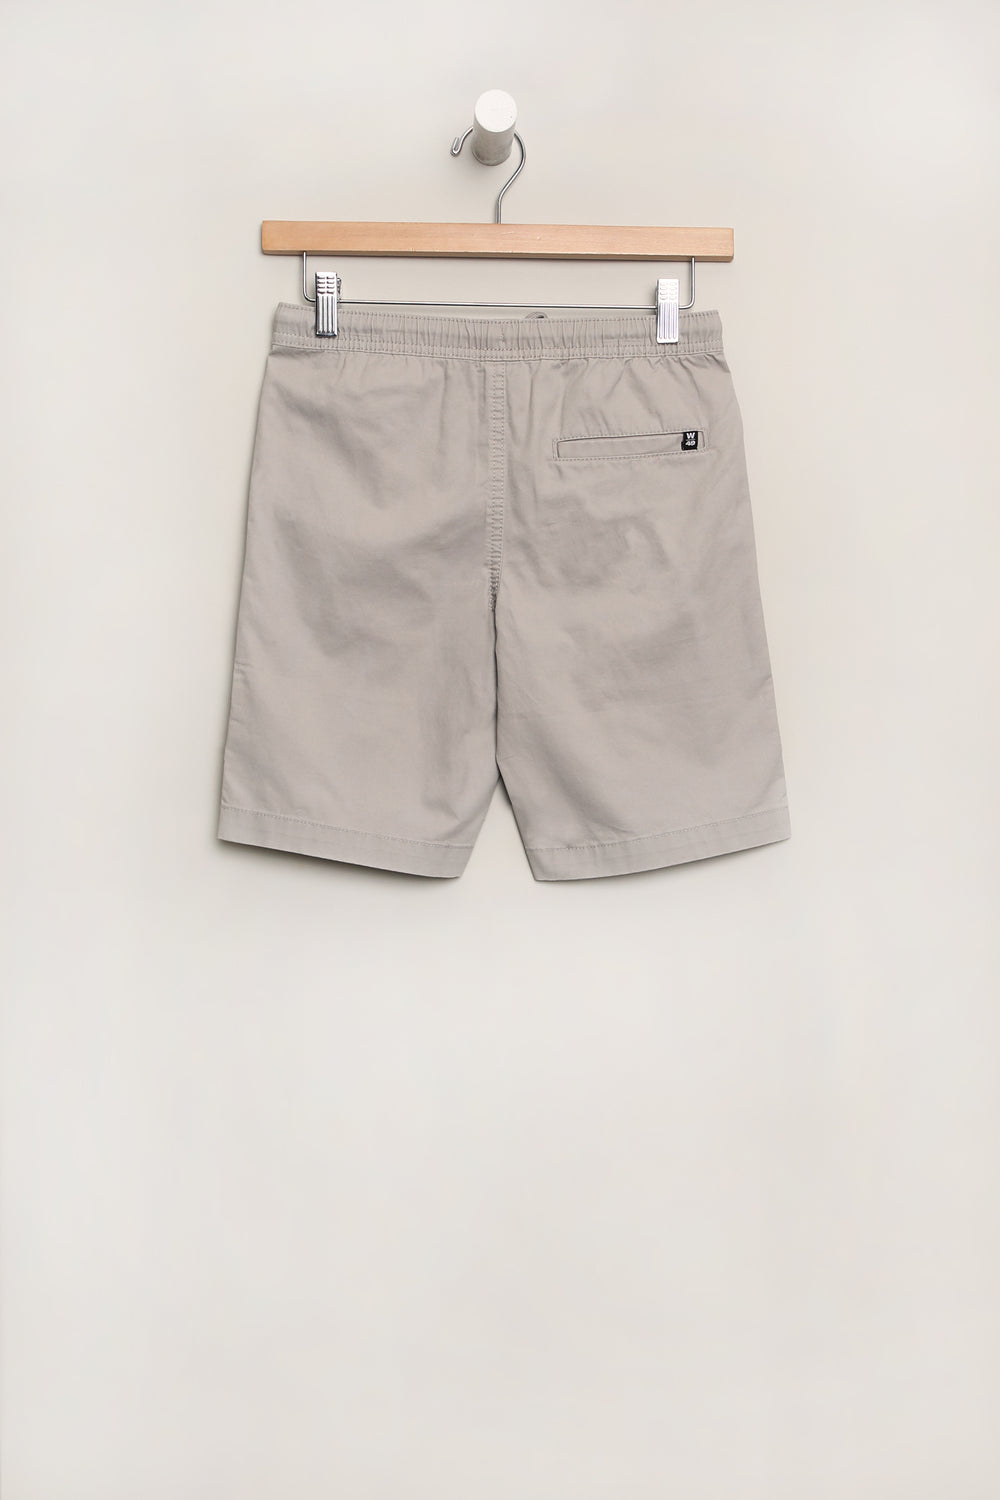 West49 Youth Twill Jogger Shorts West49 Youth Twill Jogger Shorts